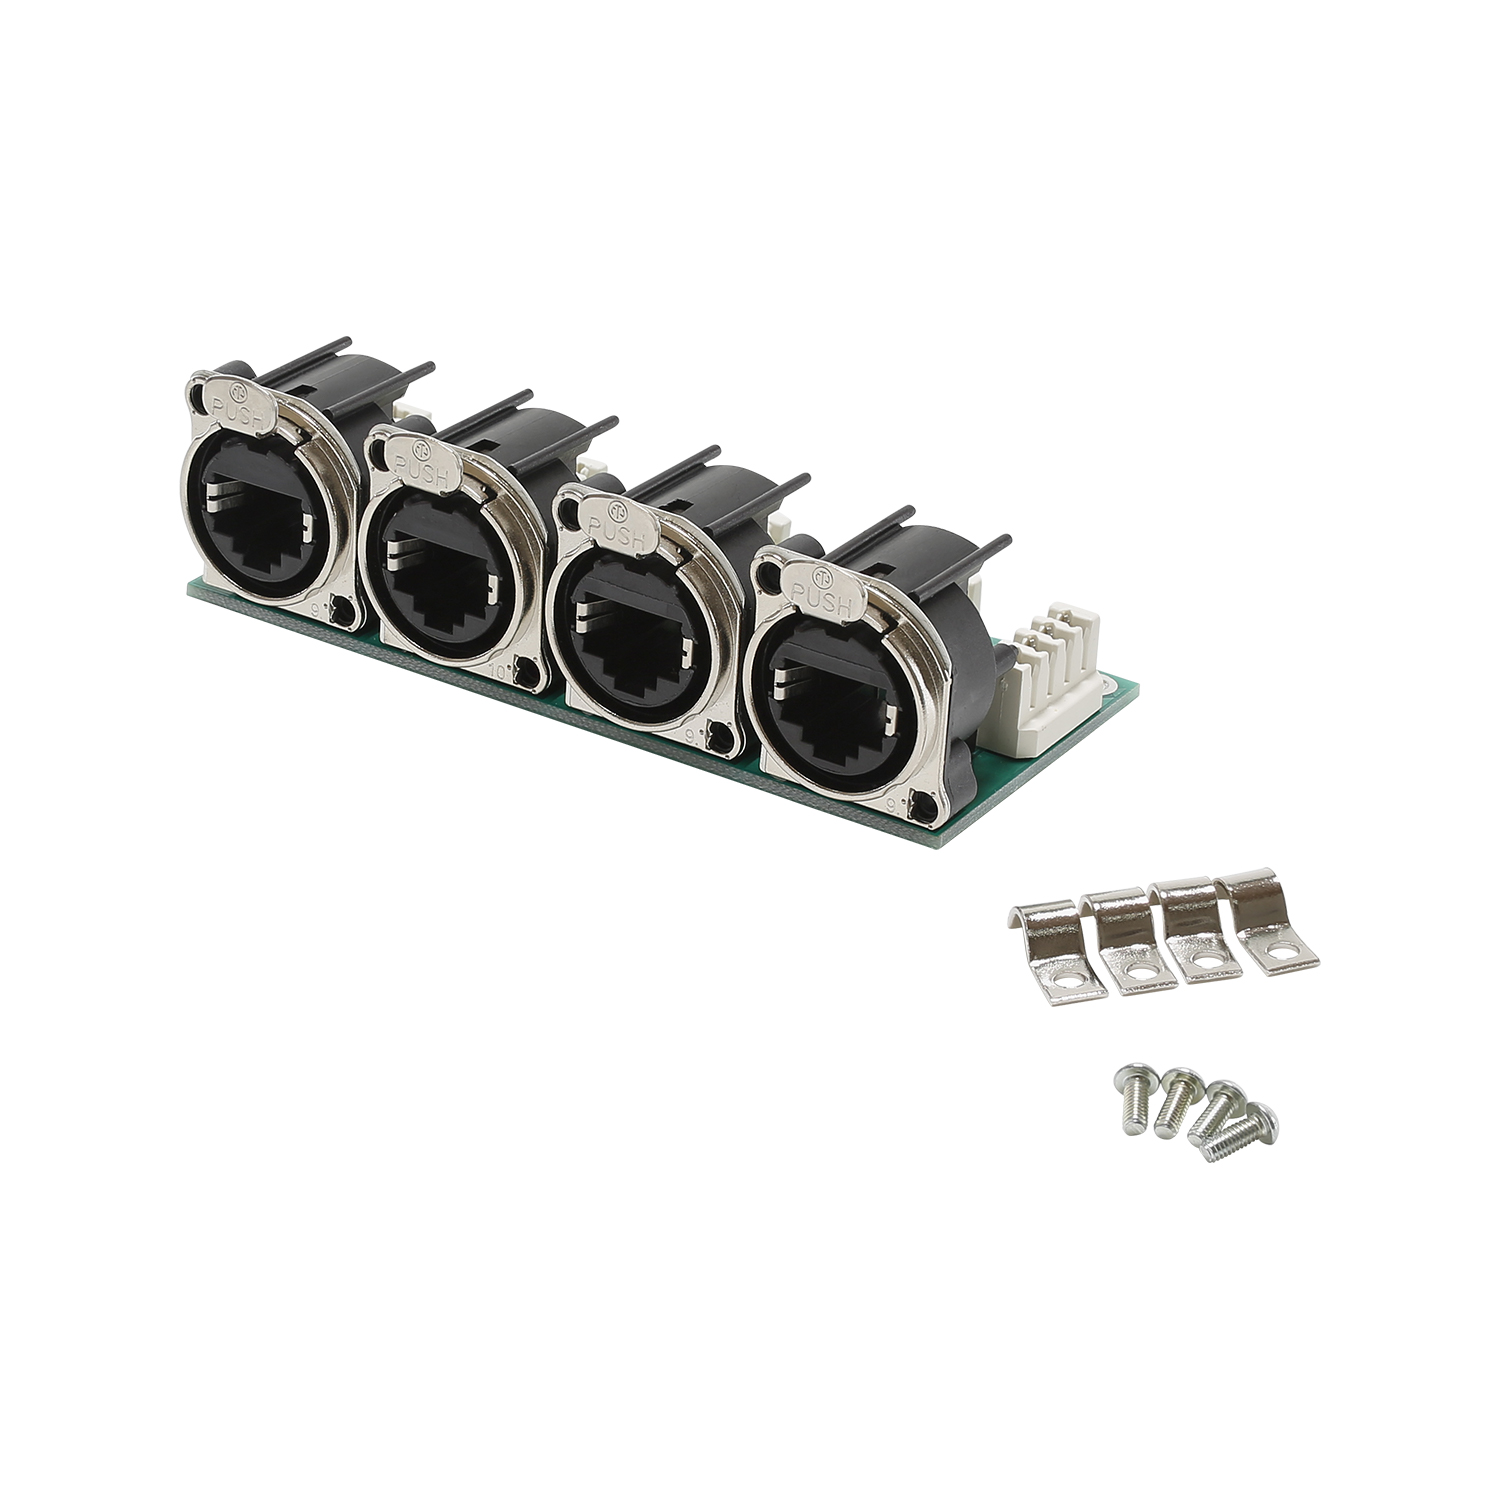 Connector Module 4 x NEUTRIK® etherCON® NE8 B-series on LSA clamp (4x2x4-pin), 8-pole , 1 HE, 3 BE, metal-, LSA-clamp (white) 32 x-, gold plated contact(s), nickel, for SYS-series